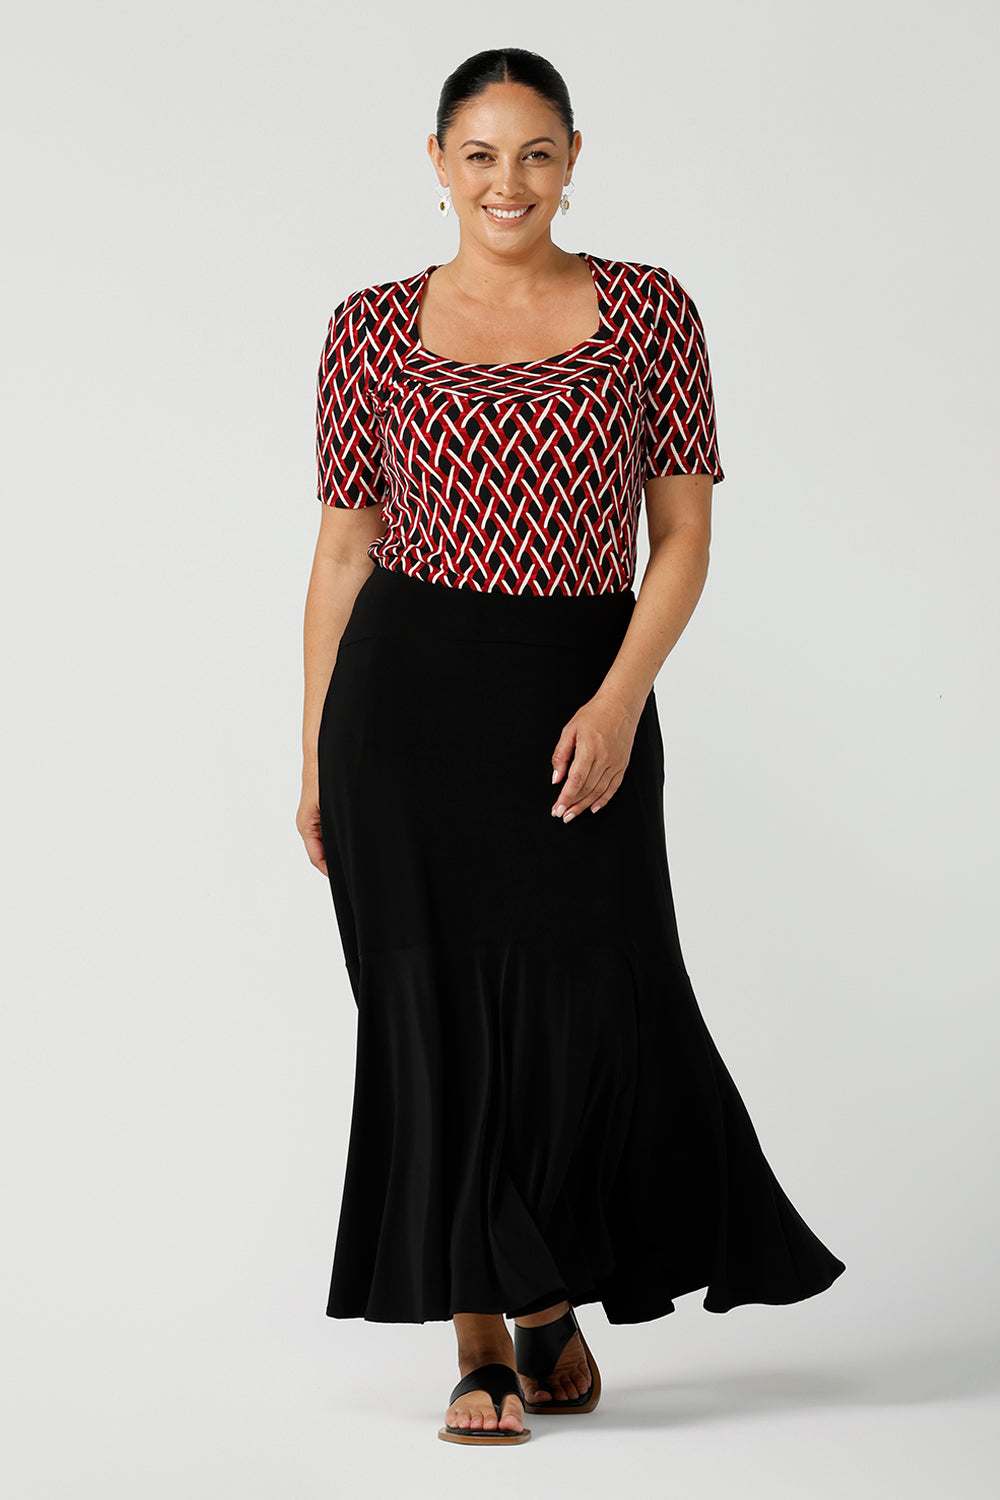 A size 12 woman wears a geometric Chevron print Berni top. Corporate causal work wear top that is comfortable and versatile. Styled back with Black Indi pants. Made in Australia for women size 8 - 24.